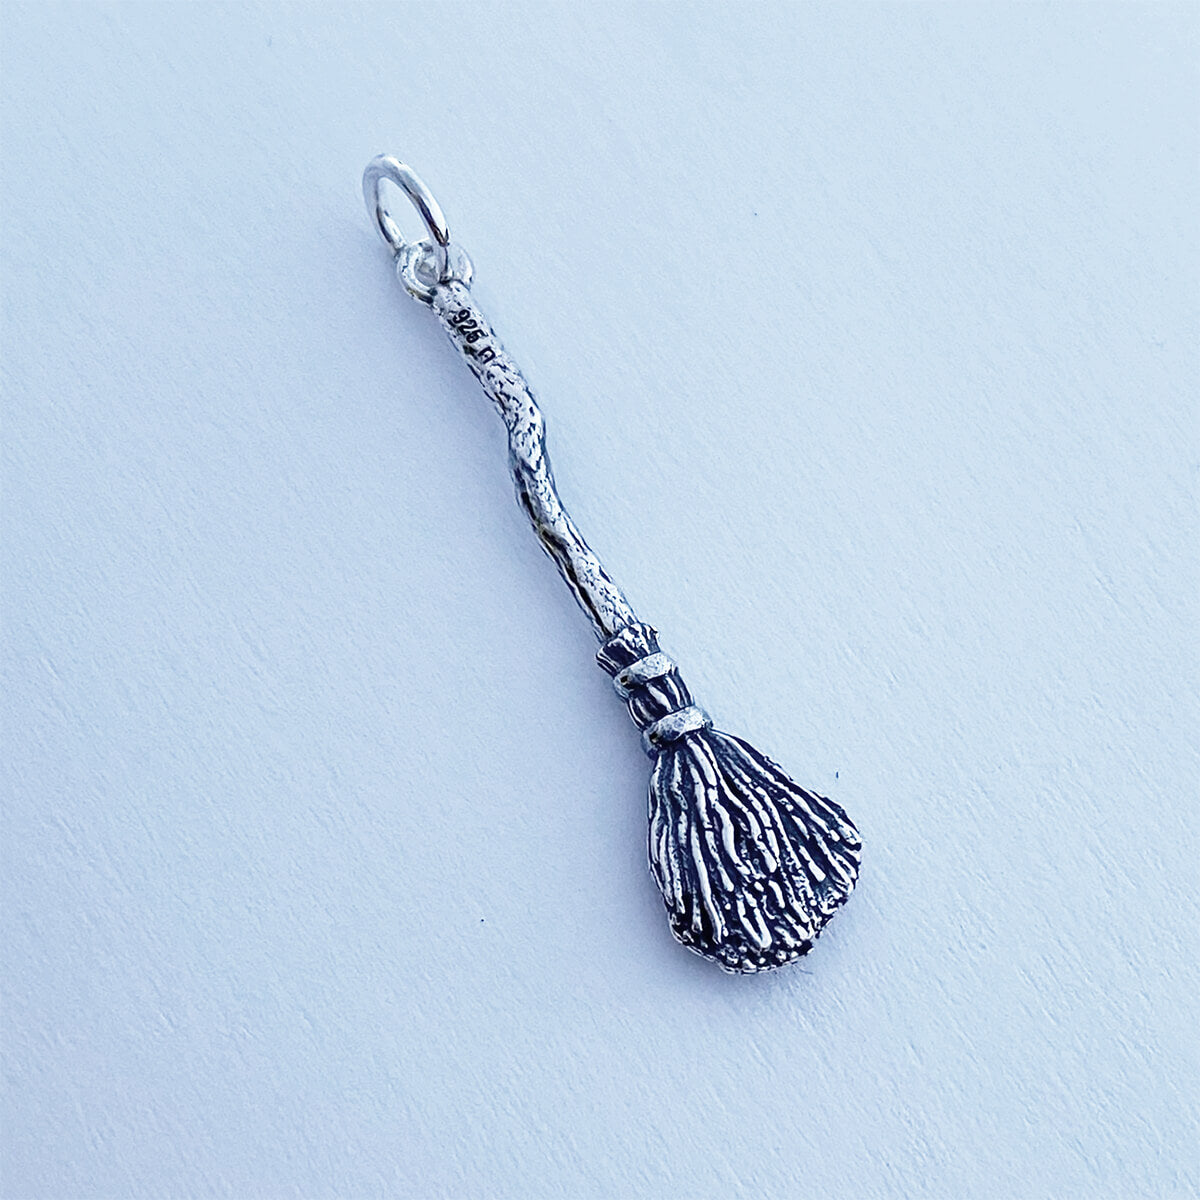 Charmarama sterling silver witch's broom charm or pendant